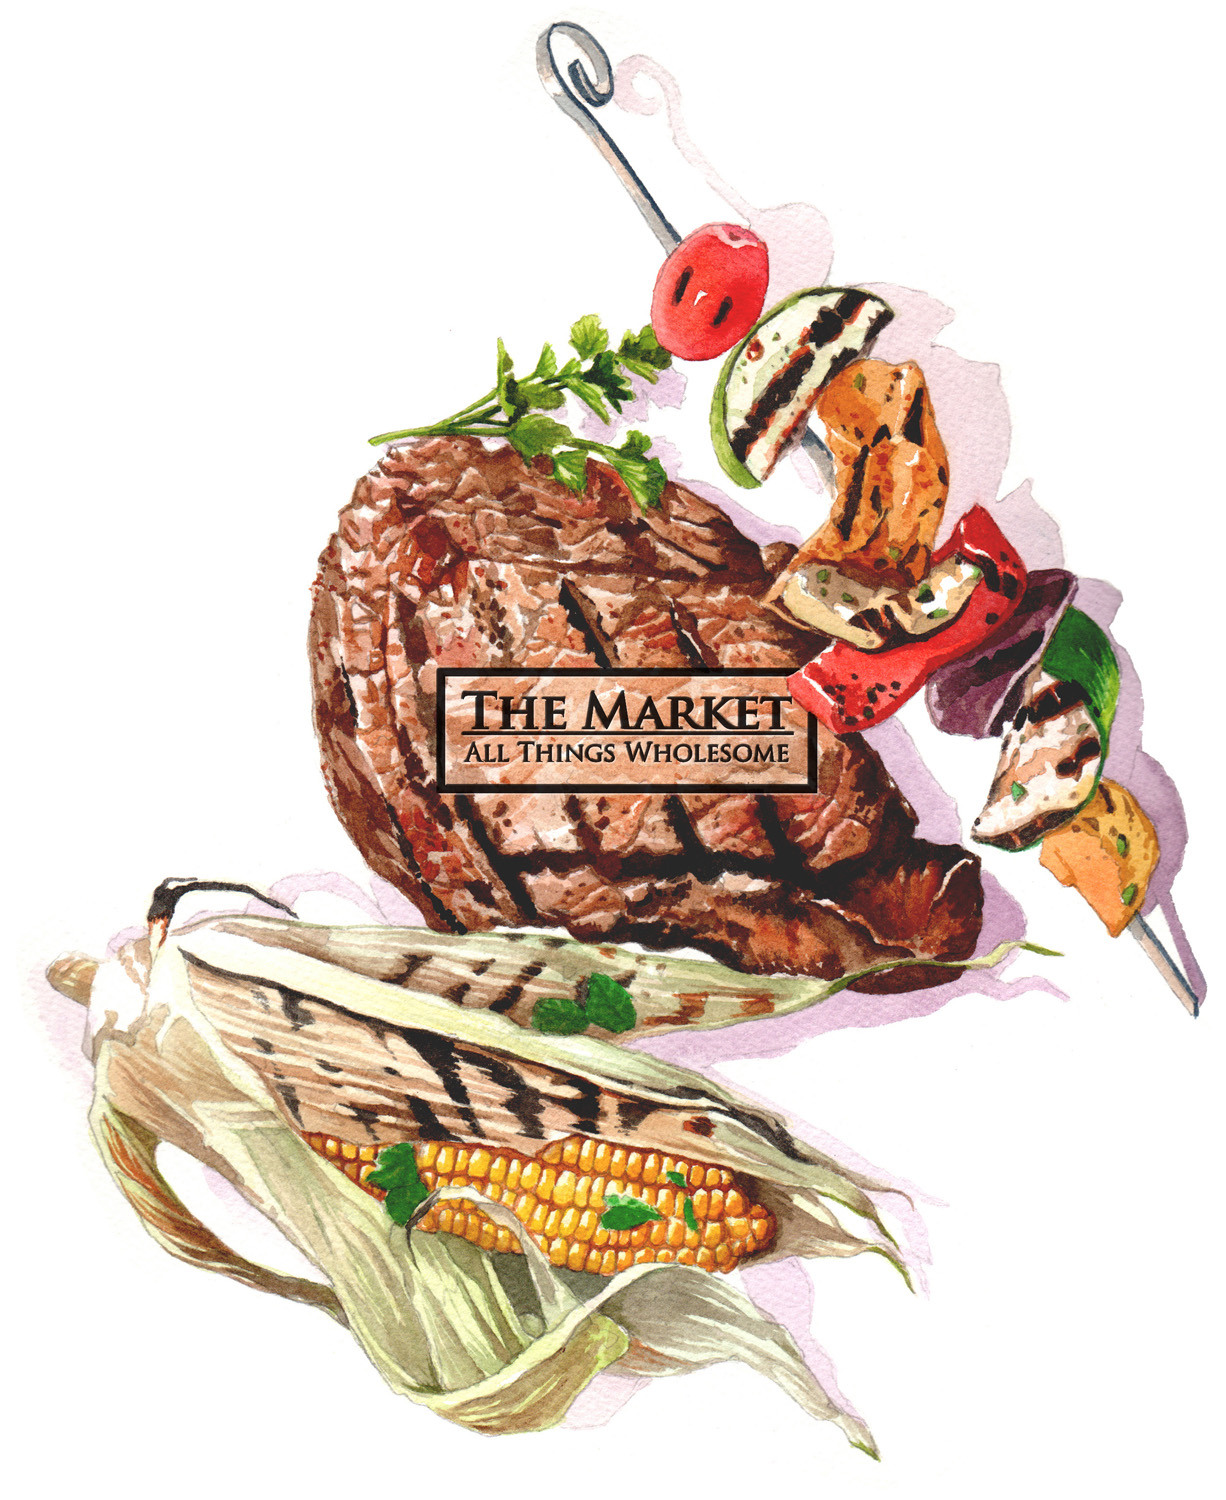 Created for The Market, Fairfield, CT. Watercolor with Photoshop type on steak.